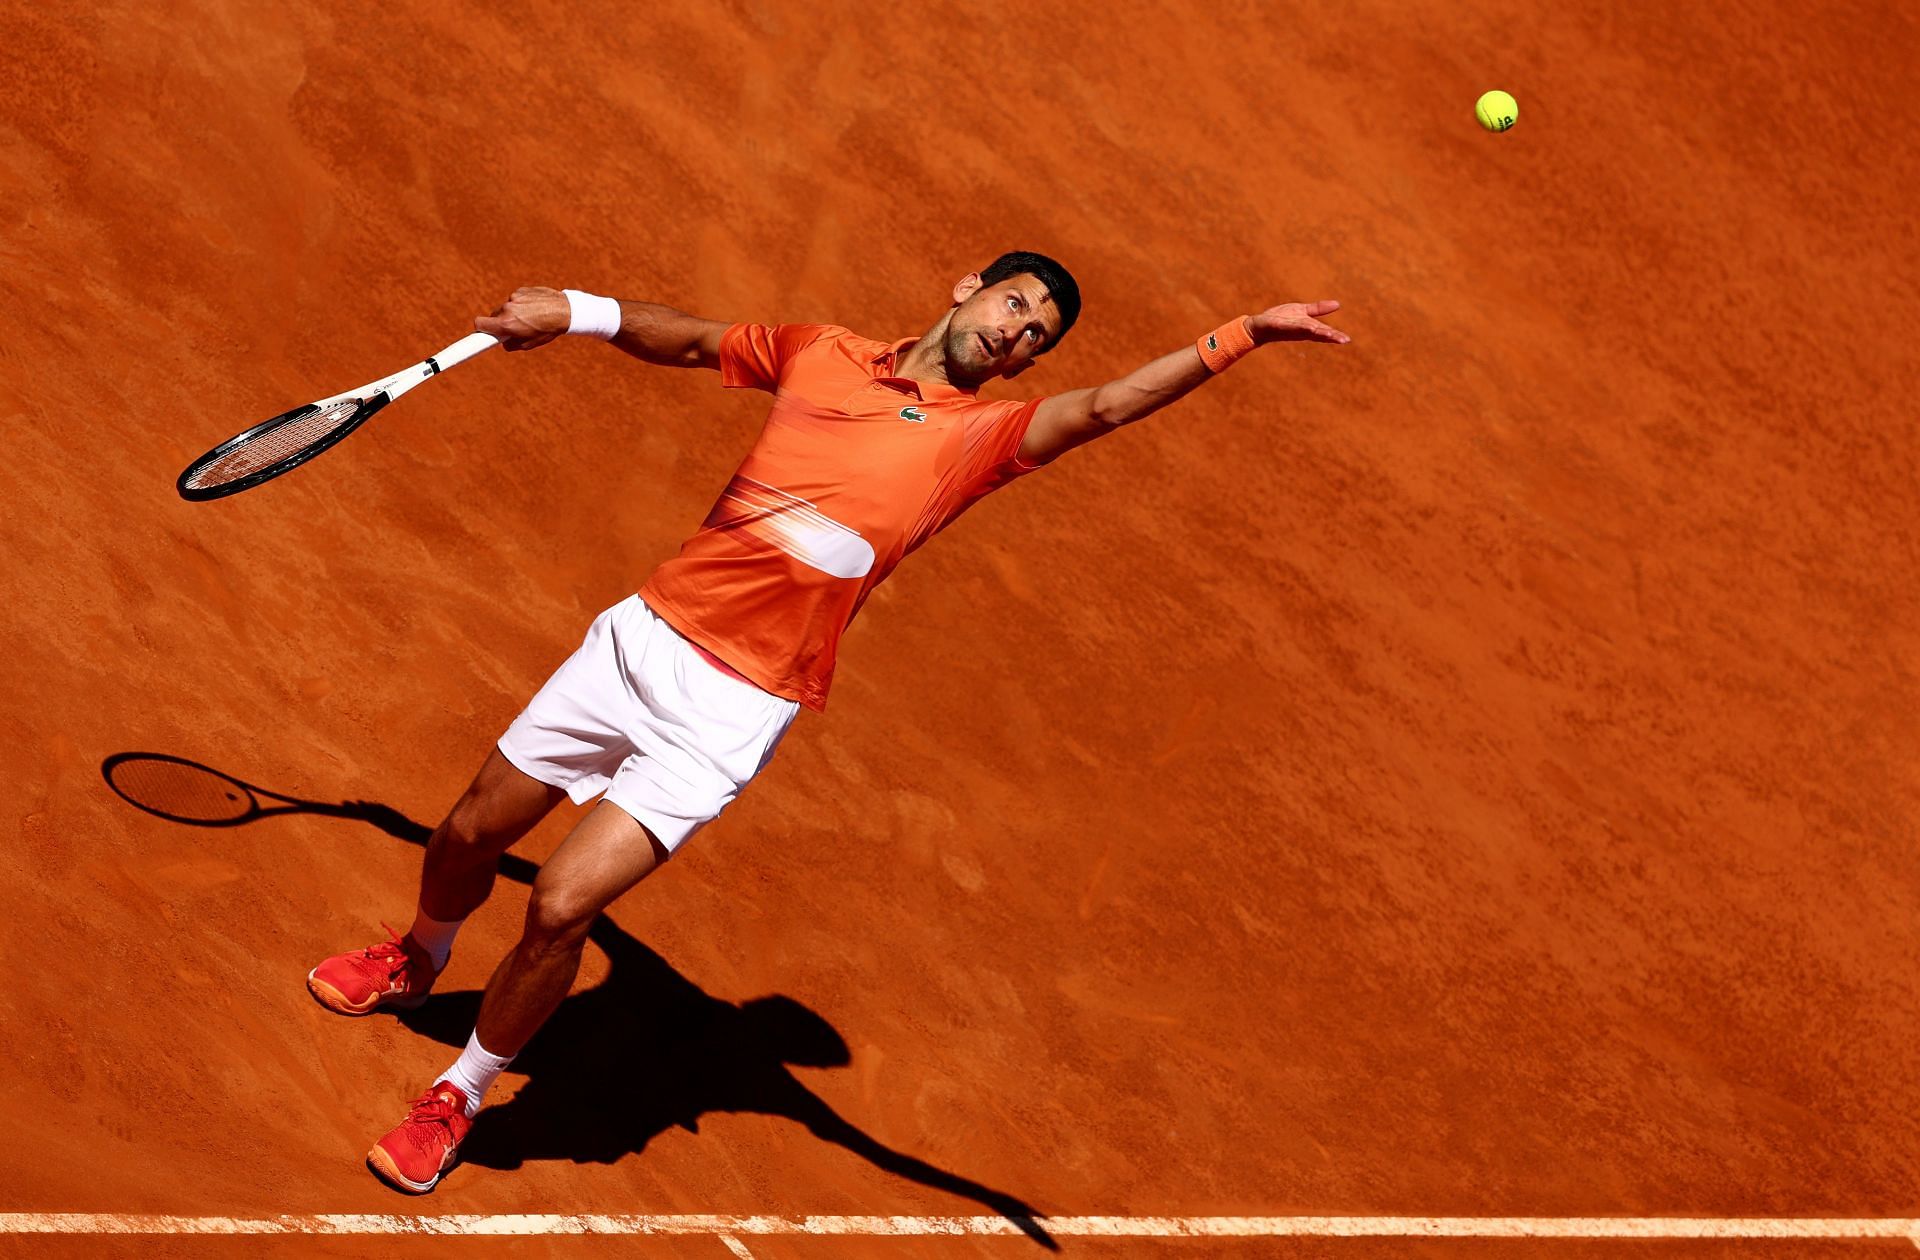 Novak Djokovic in action at the 2022 Mutua Madrid Open - Day 10